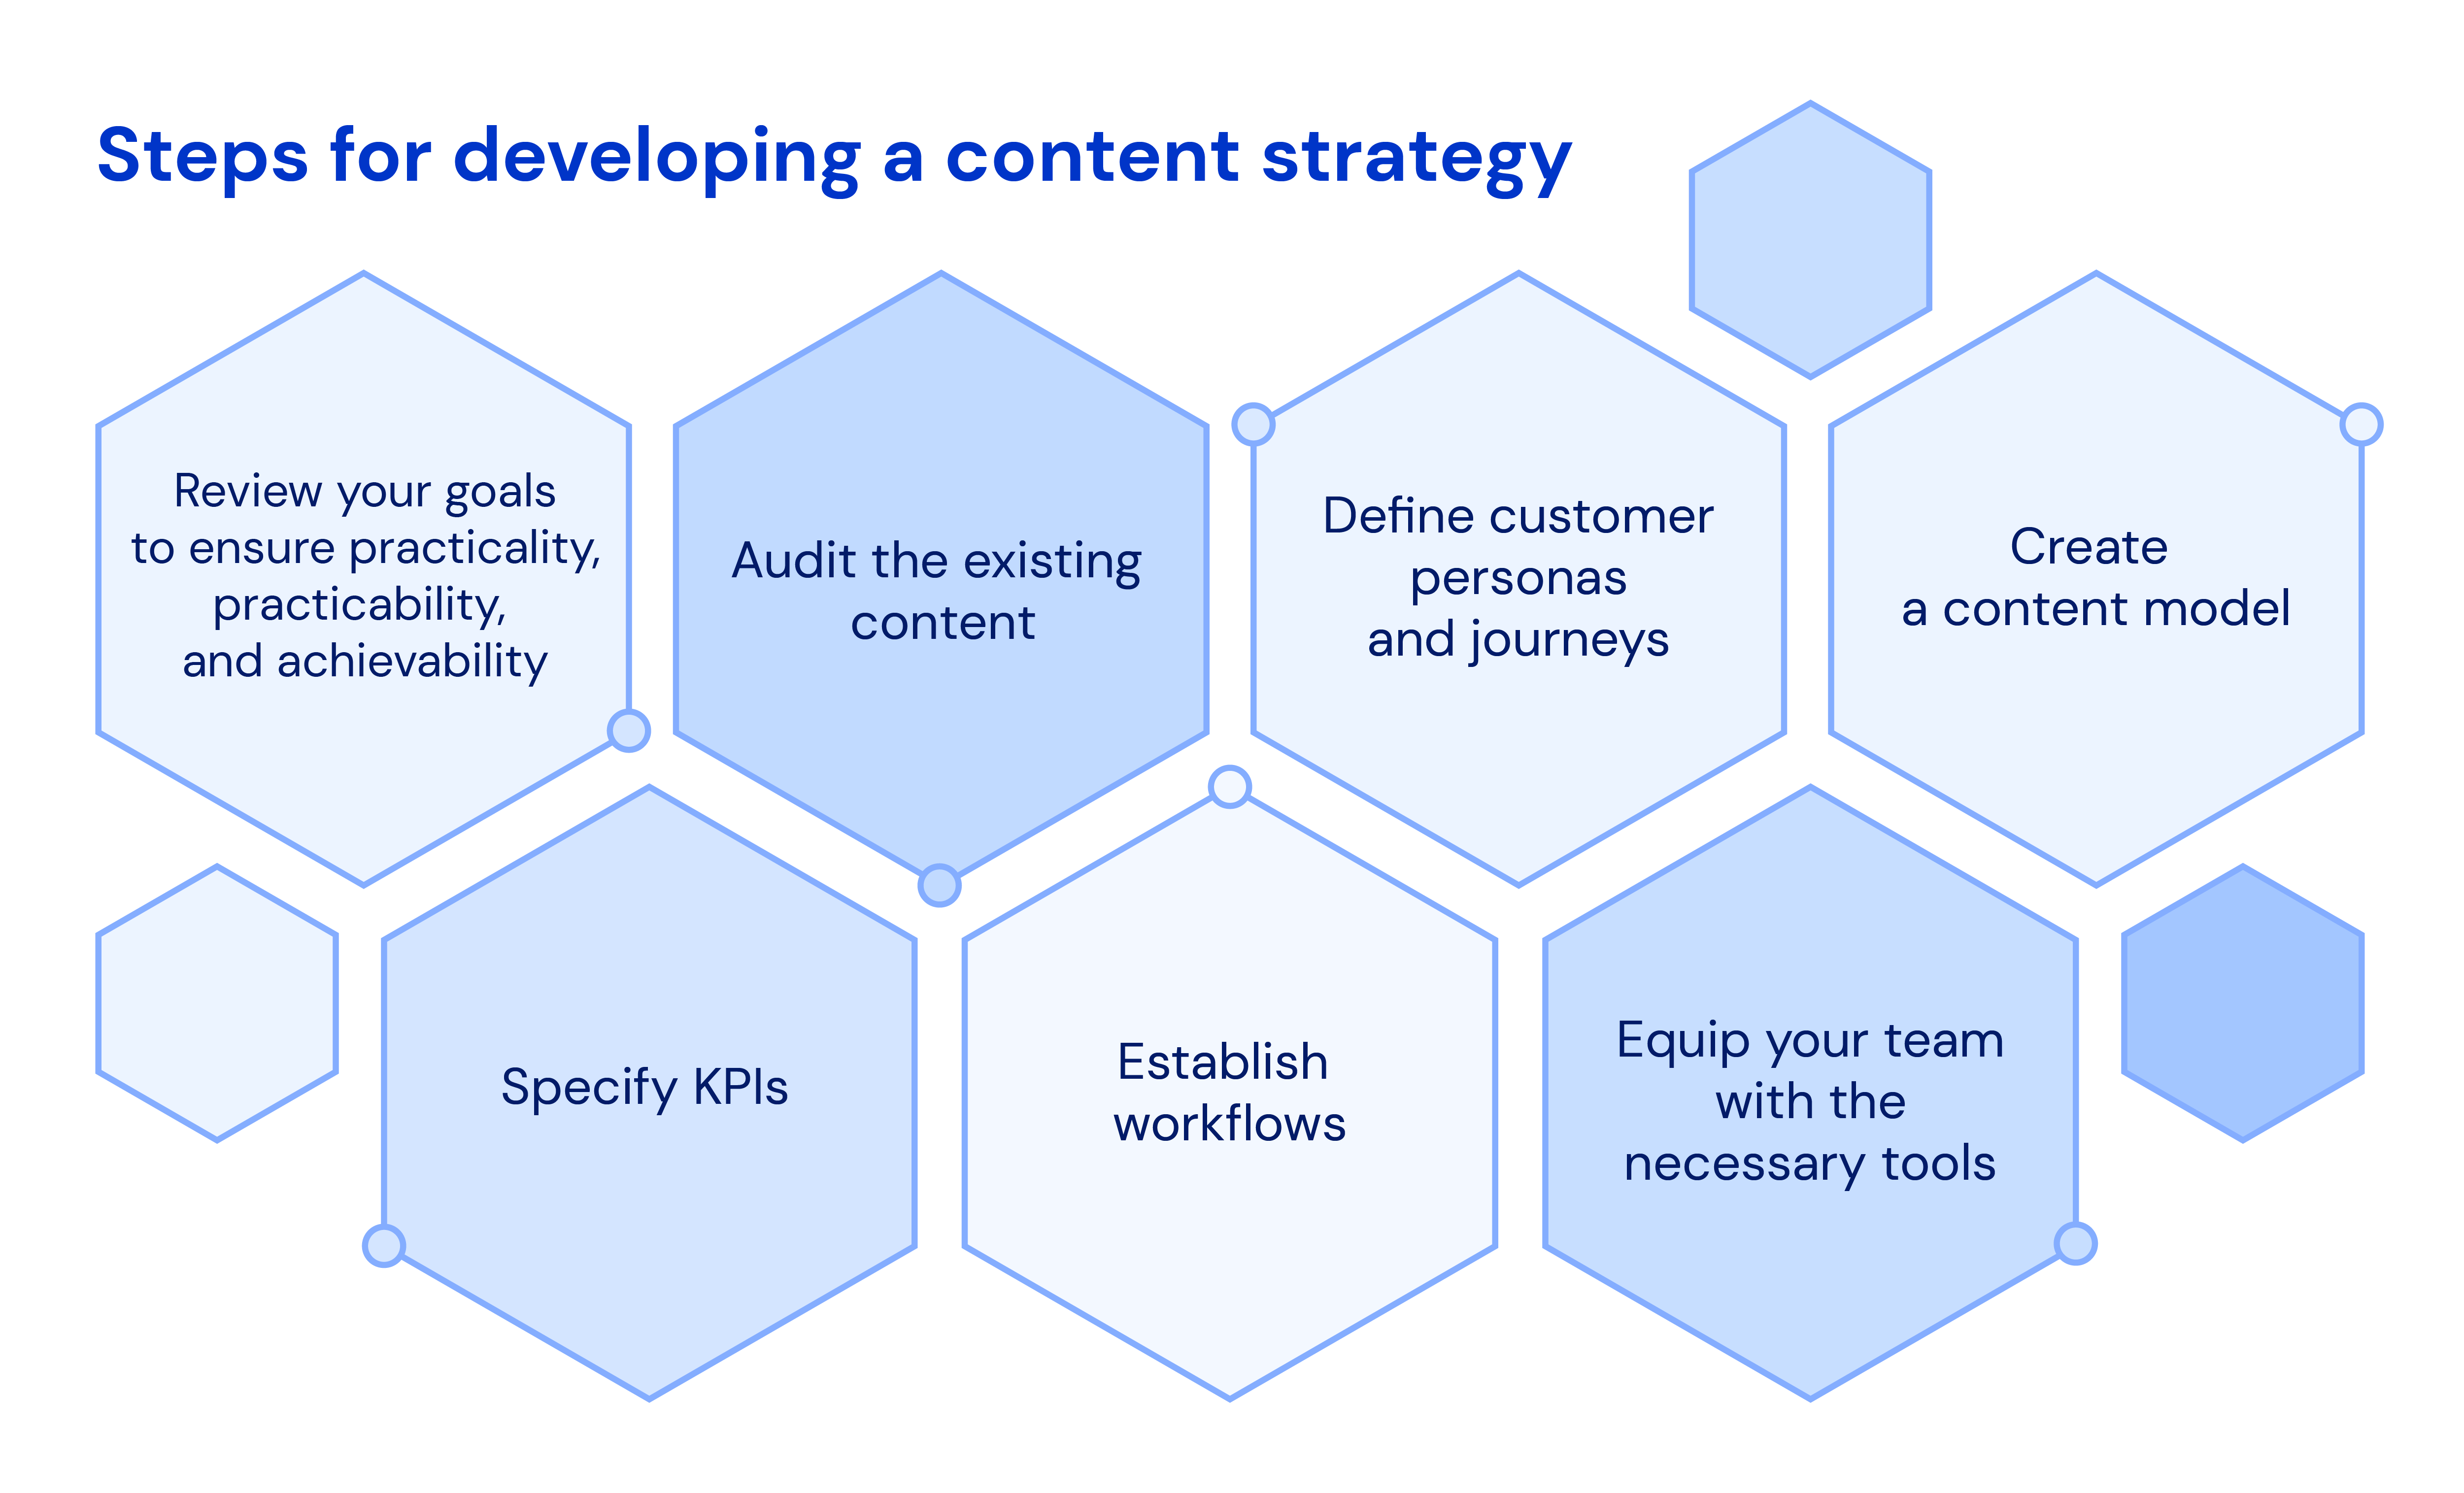 Steps for developing a content strategy